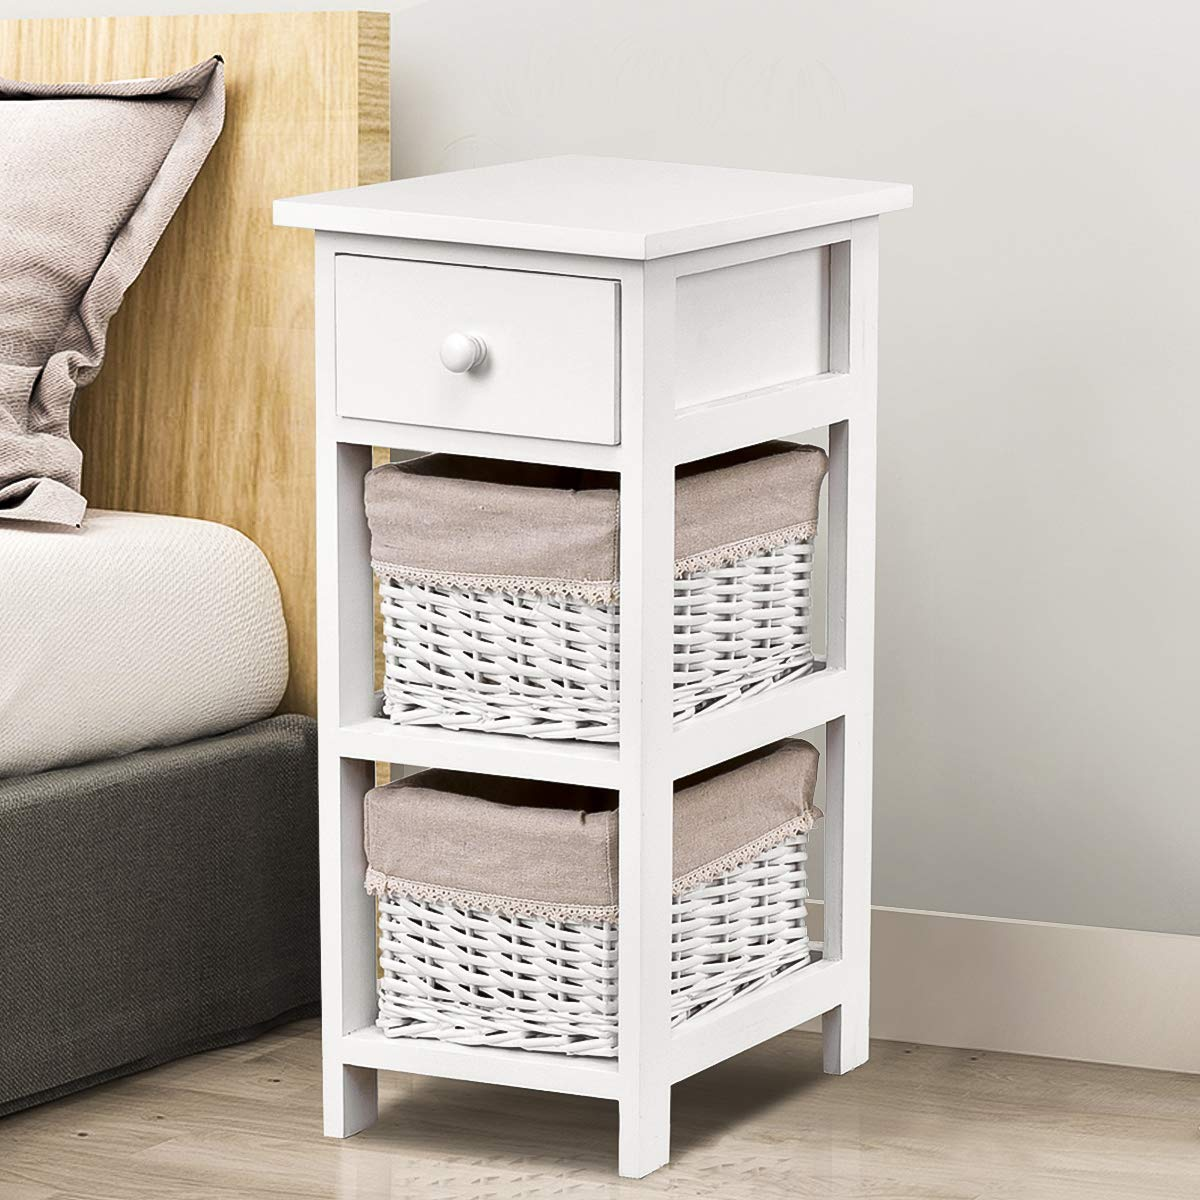 Giantex Wooden Nightstand 3-Tier Modern Bedside Table with 1 Drawer and 2 Storage Baskets